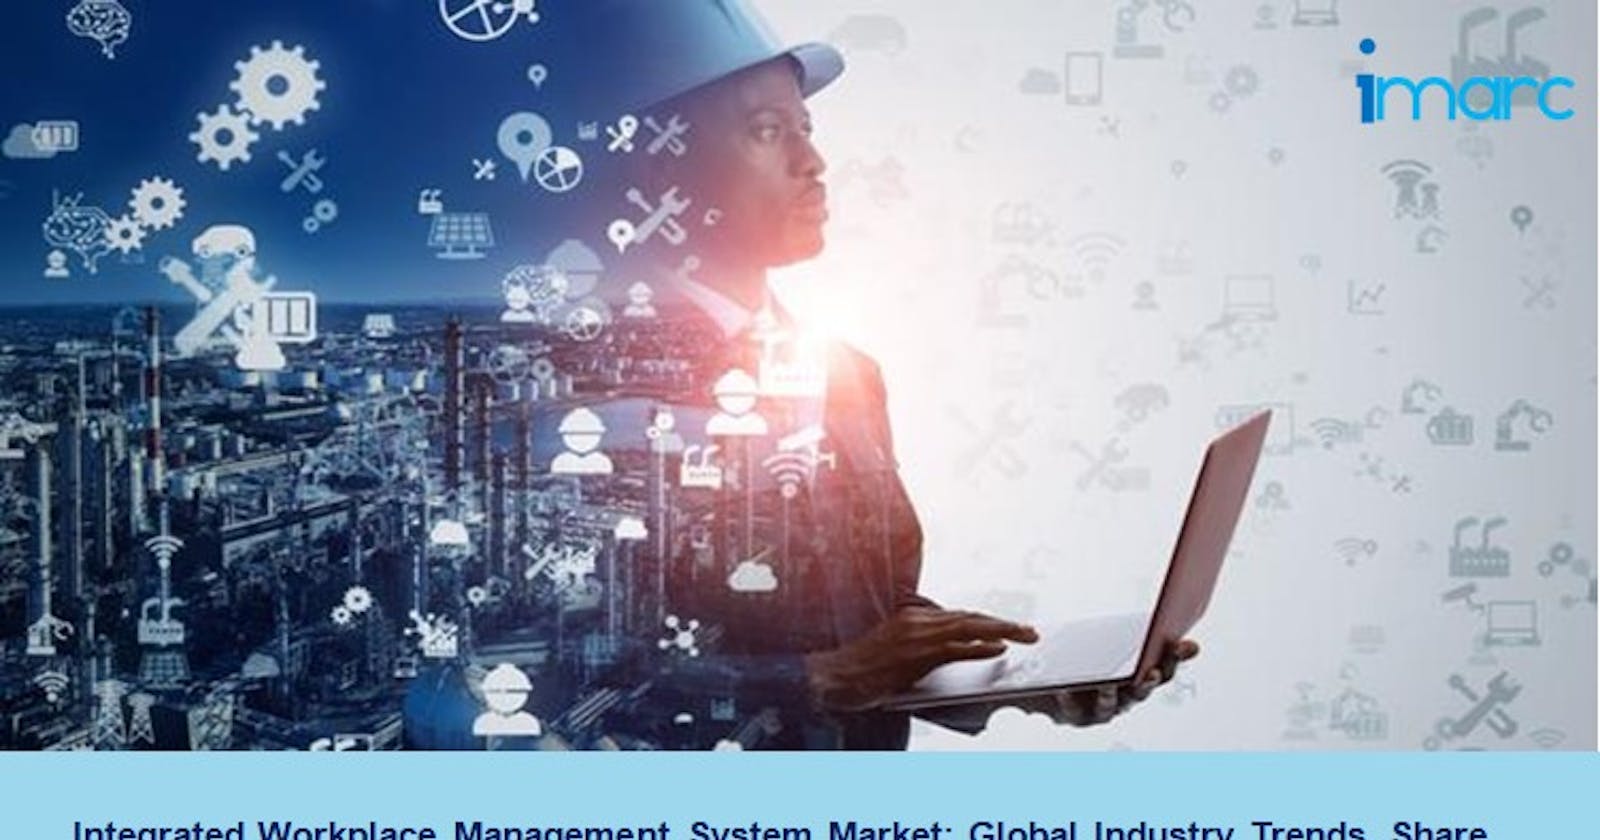 Integrated Workplace Management System Market 2022, Share, Demand And Forecast 2027